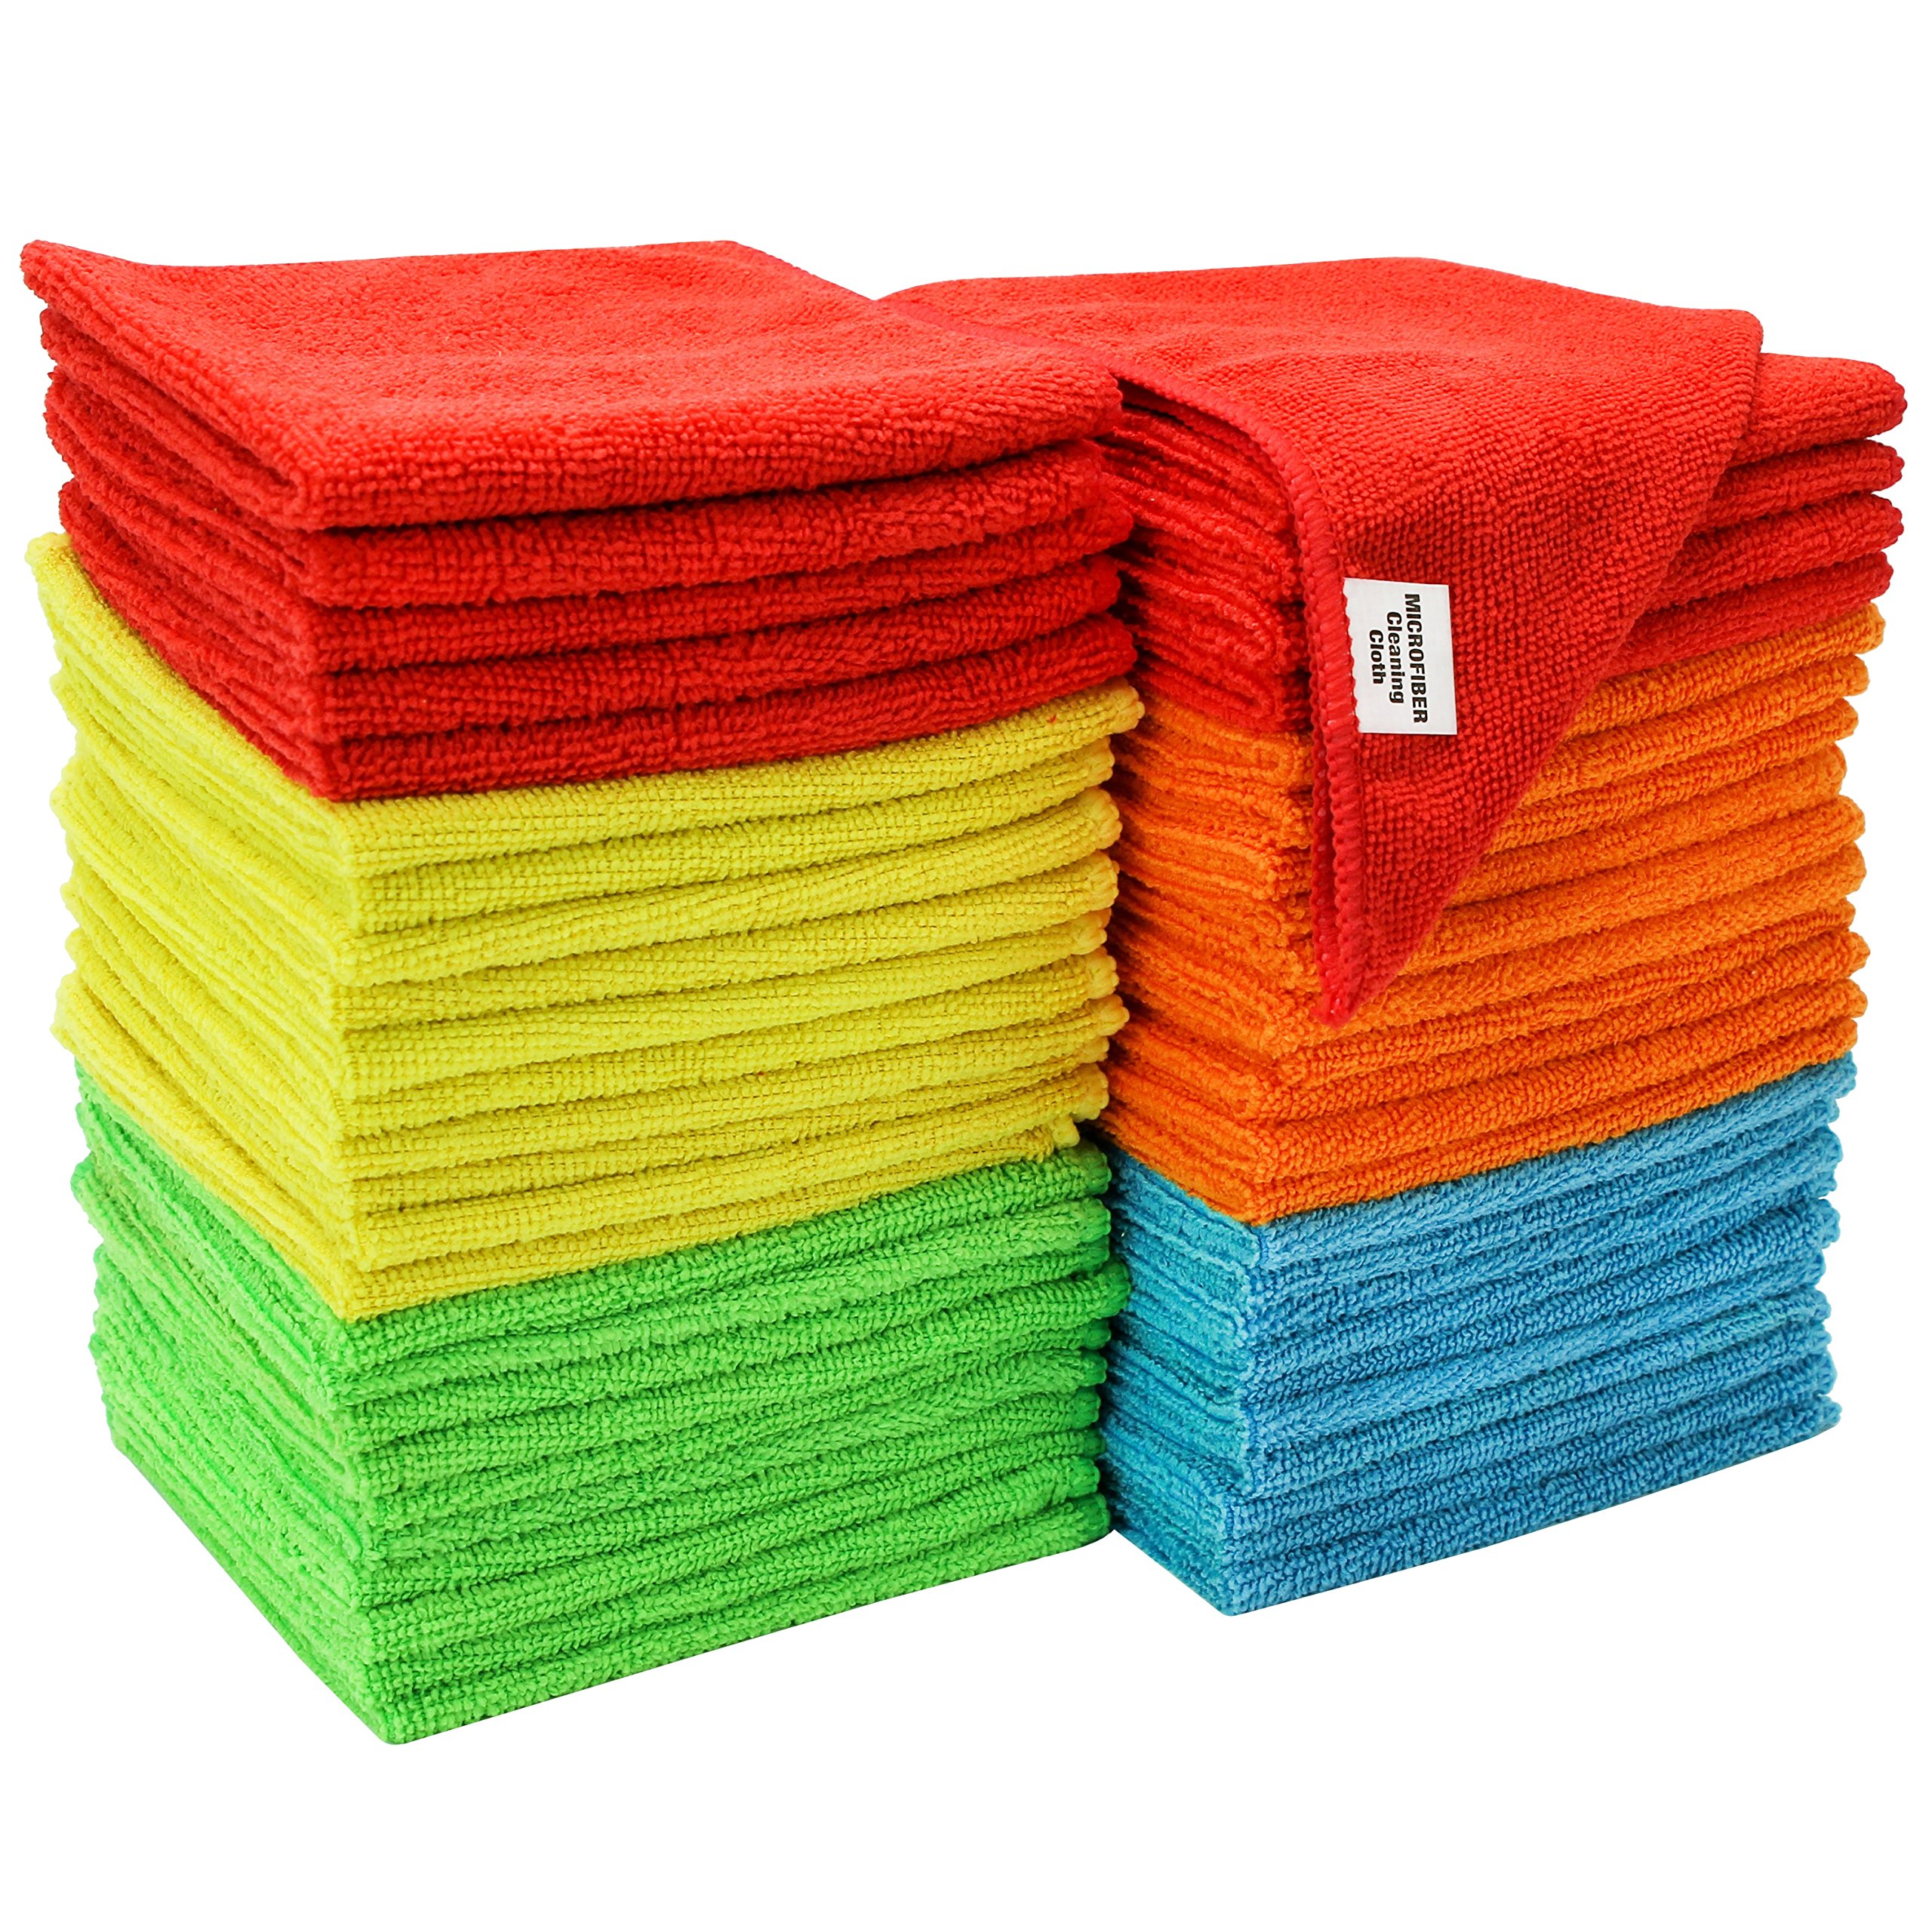 Multicolor Microfiber Cleaning Cloth Warp Knitted Towel